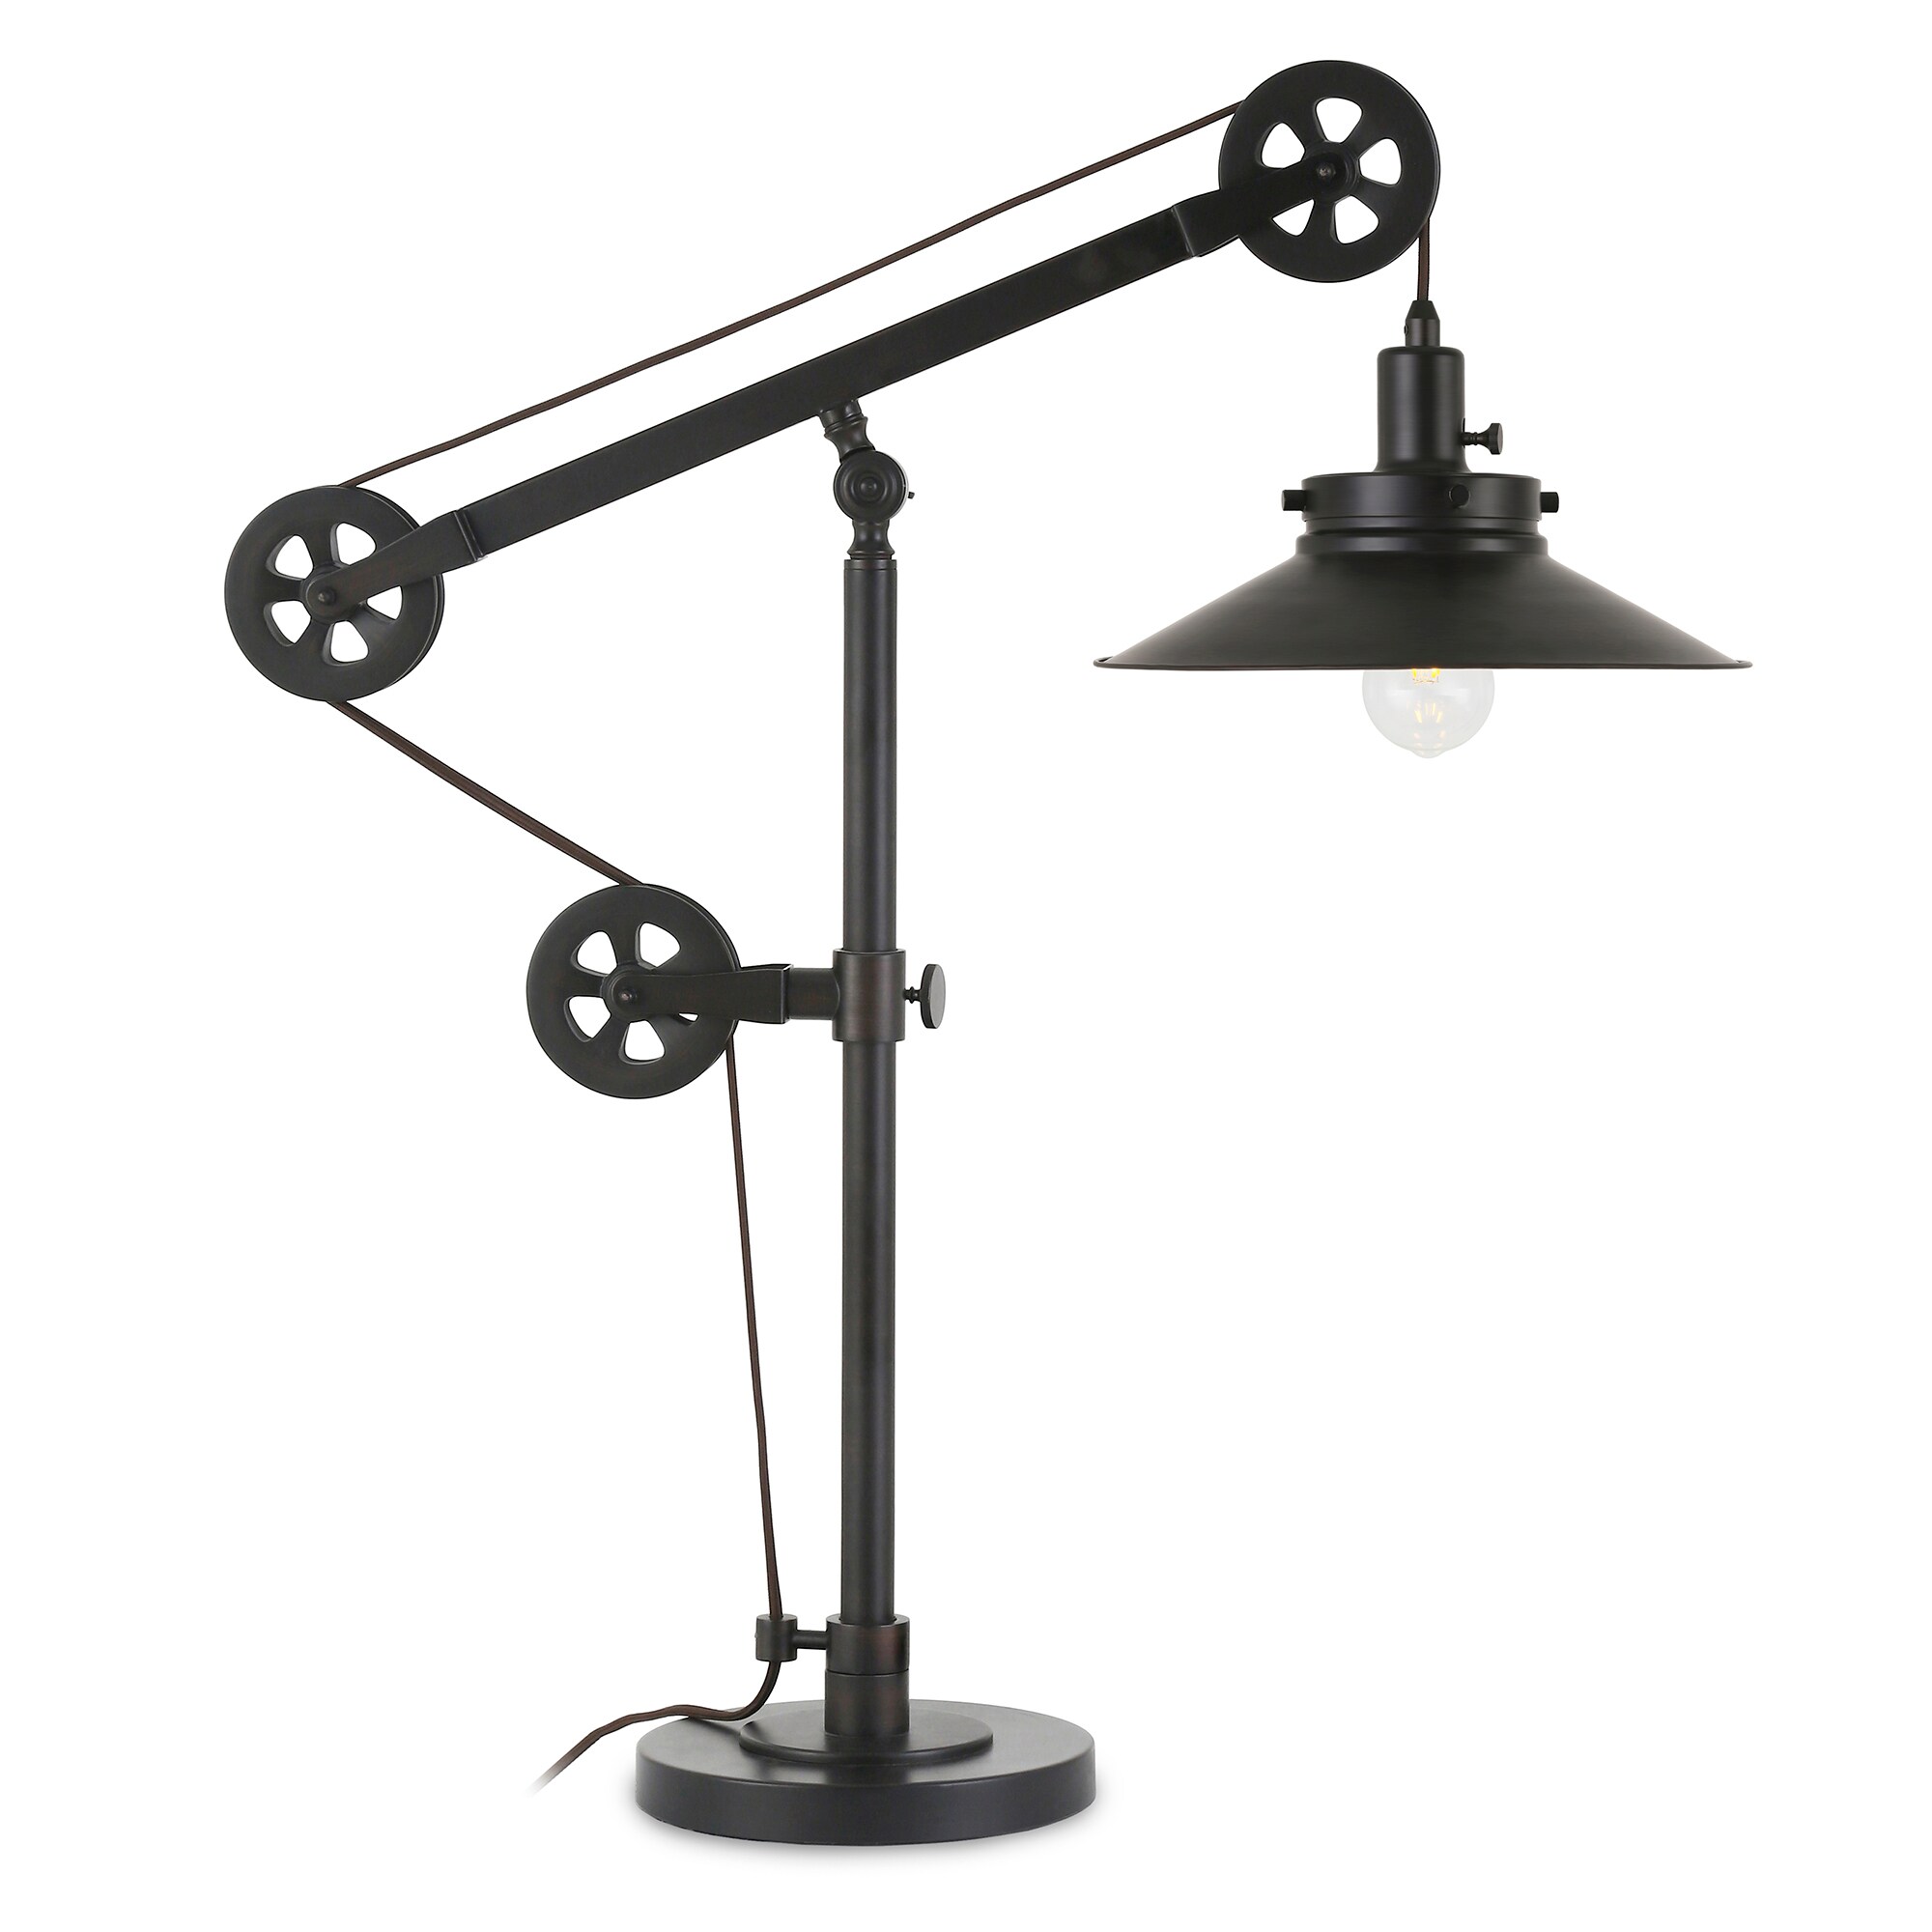 Metal Shade In The Table Lamps, How To Put A Table Lamp Together